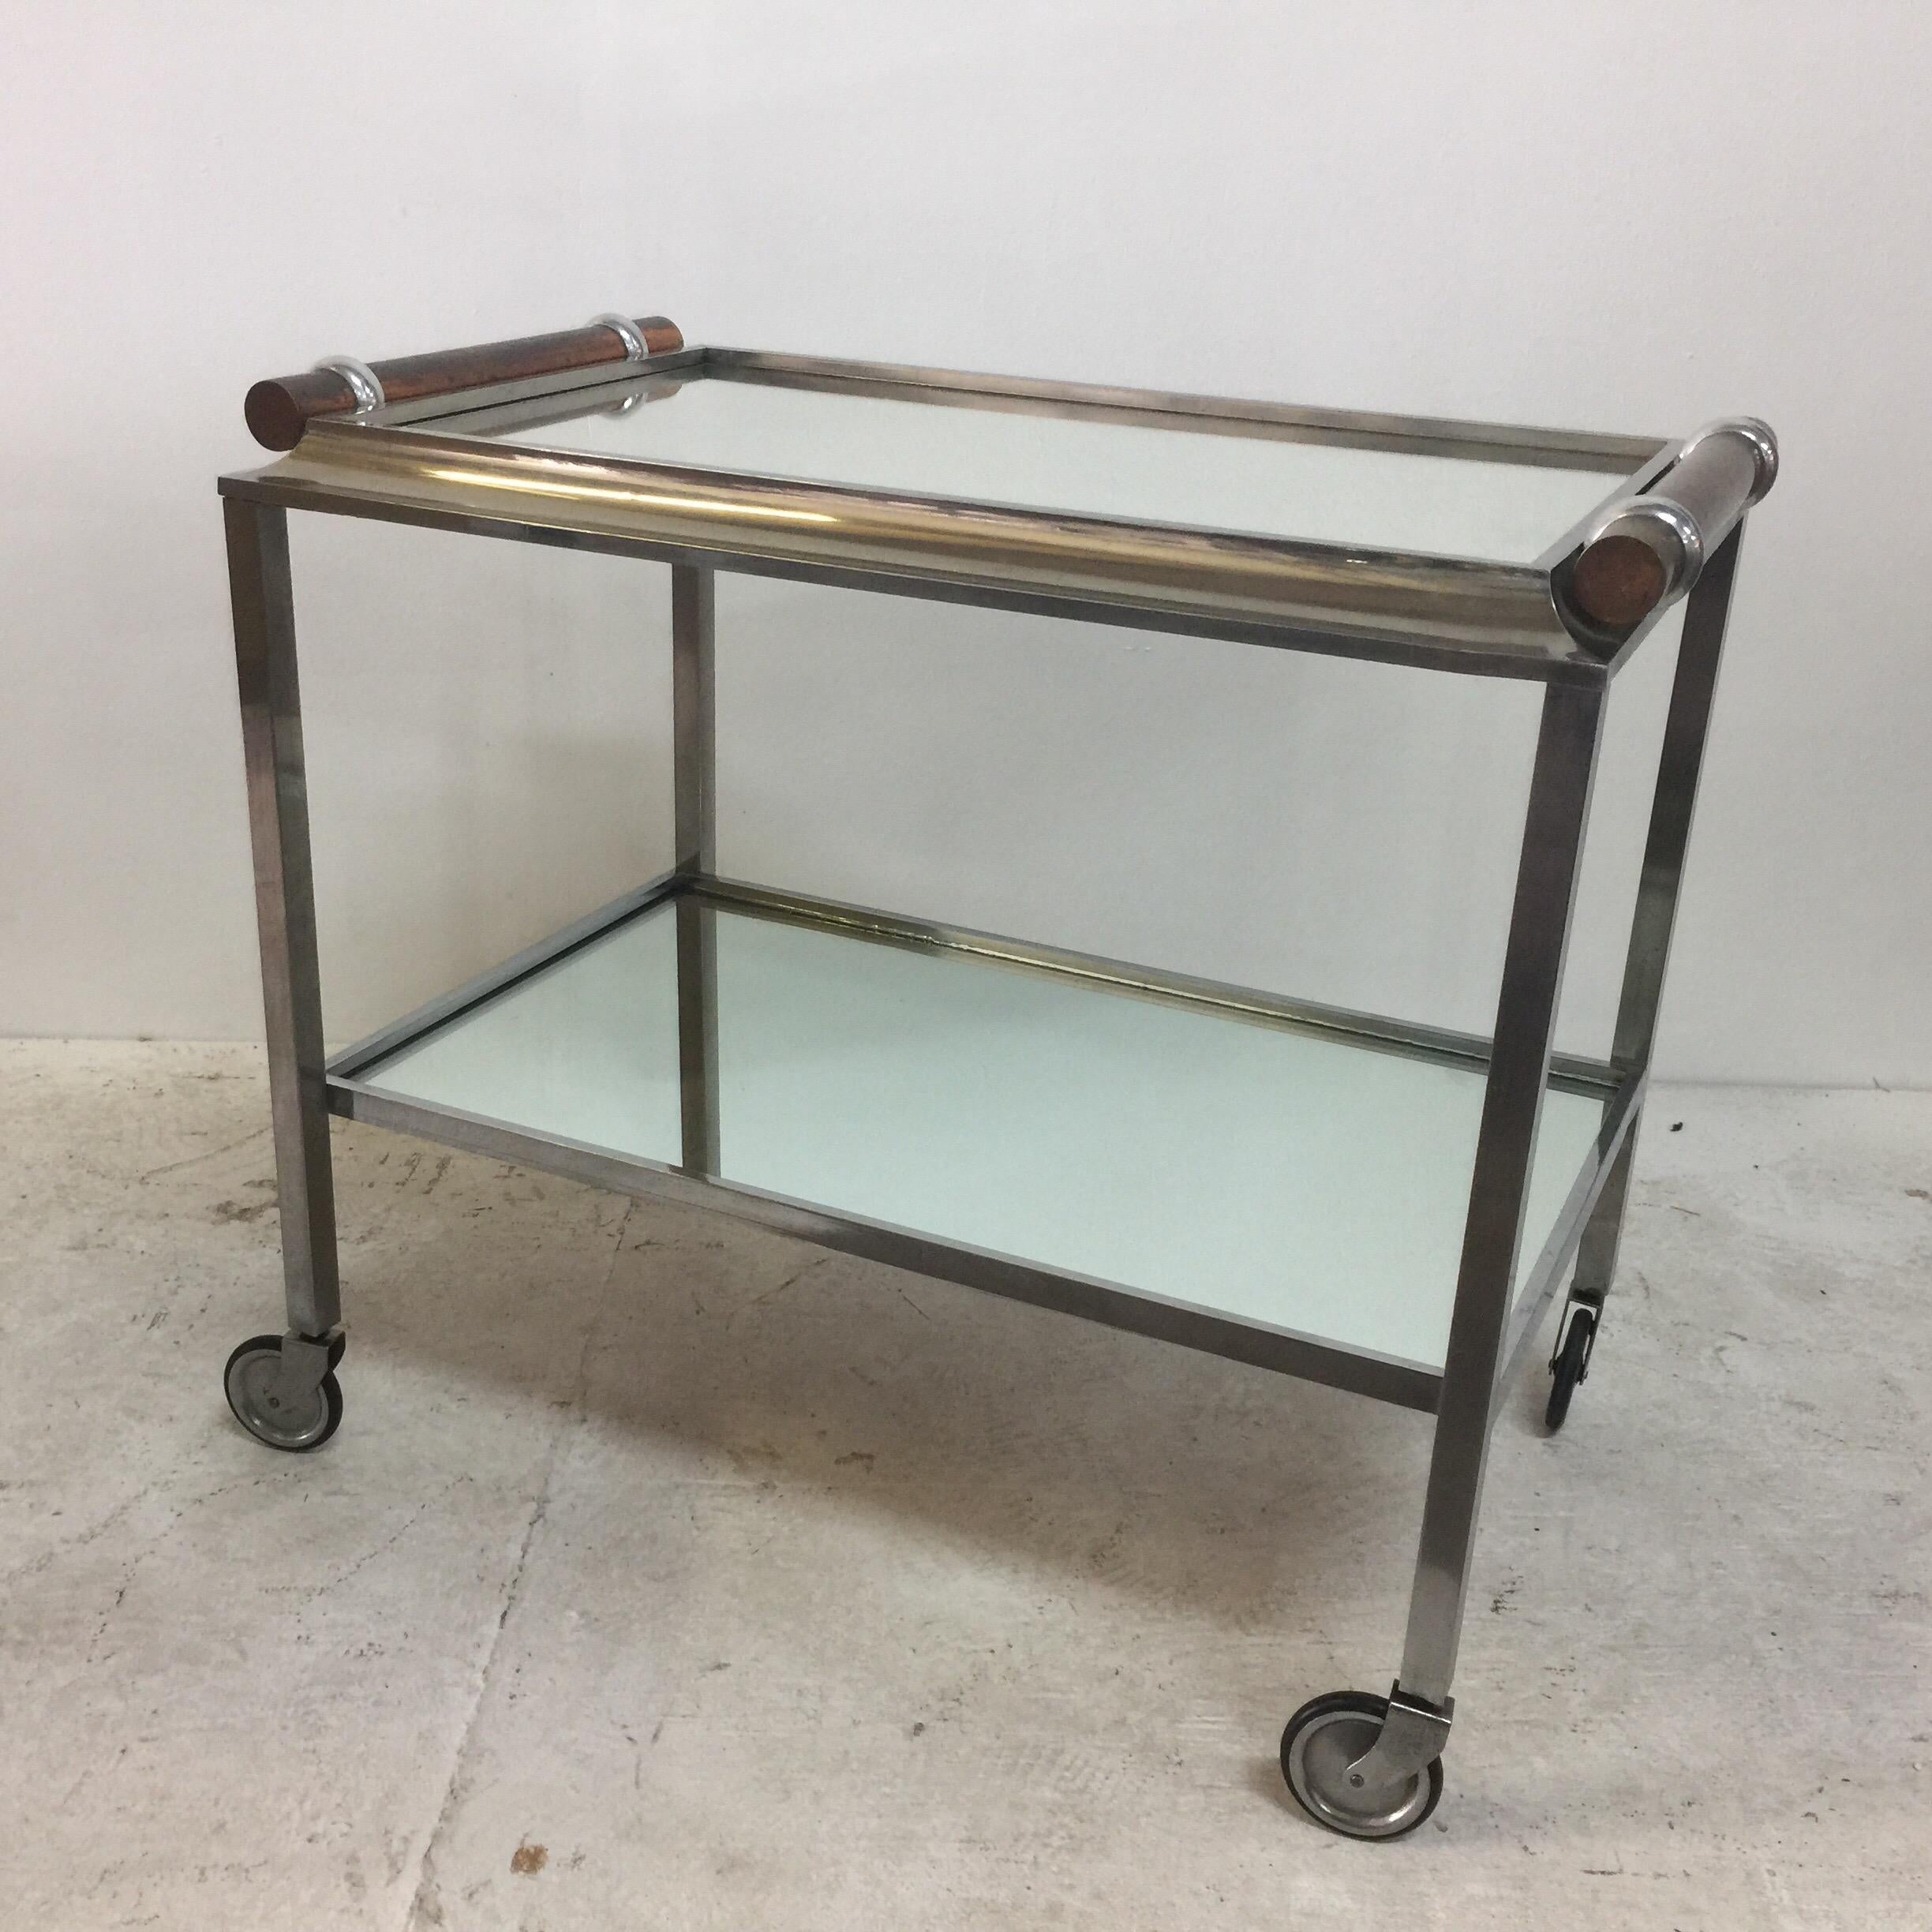 This beautiful two-tiered tea or bar cart with original mirror shelves and copper handles. The cart is on casters and in good working condition. Very sleek and elegant. The tray top is not removable.